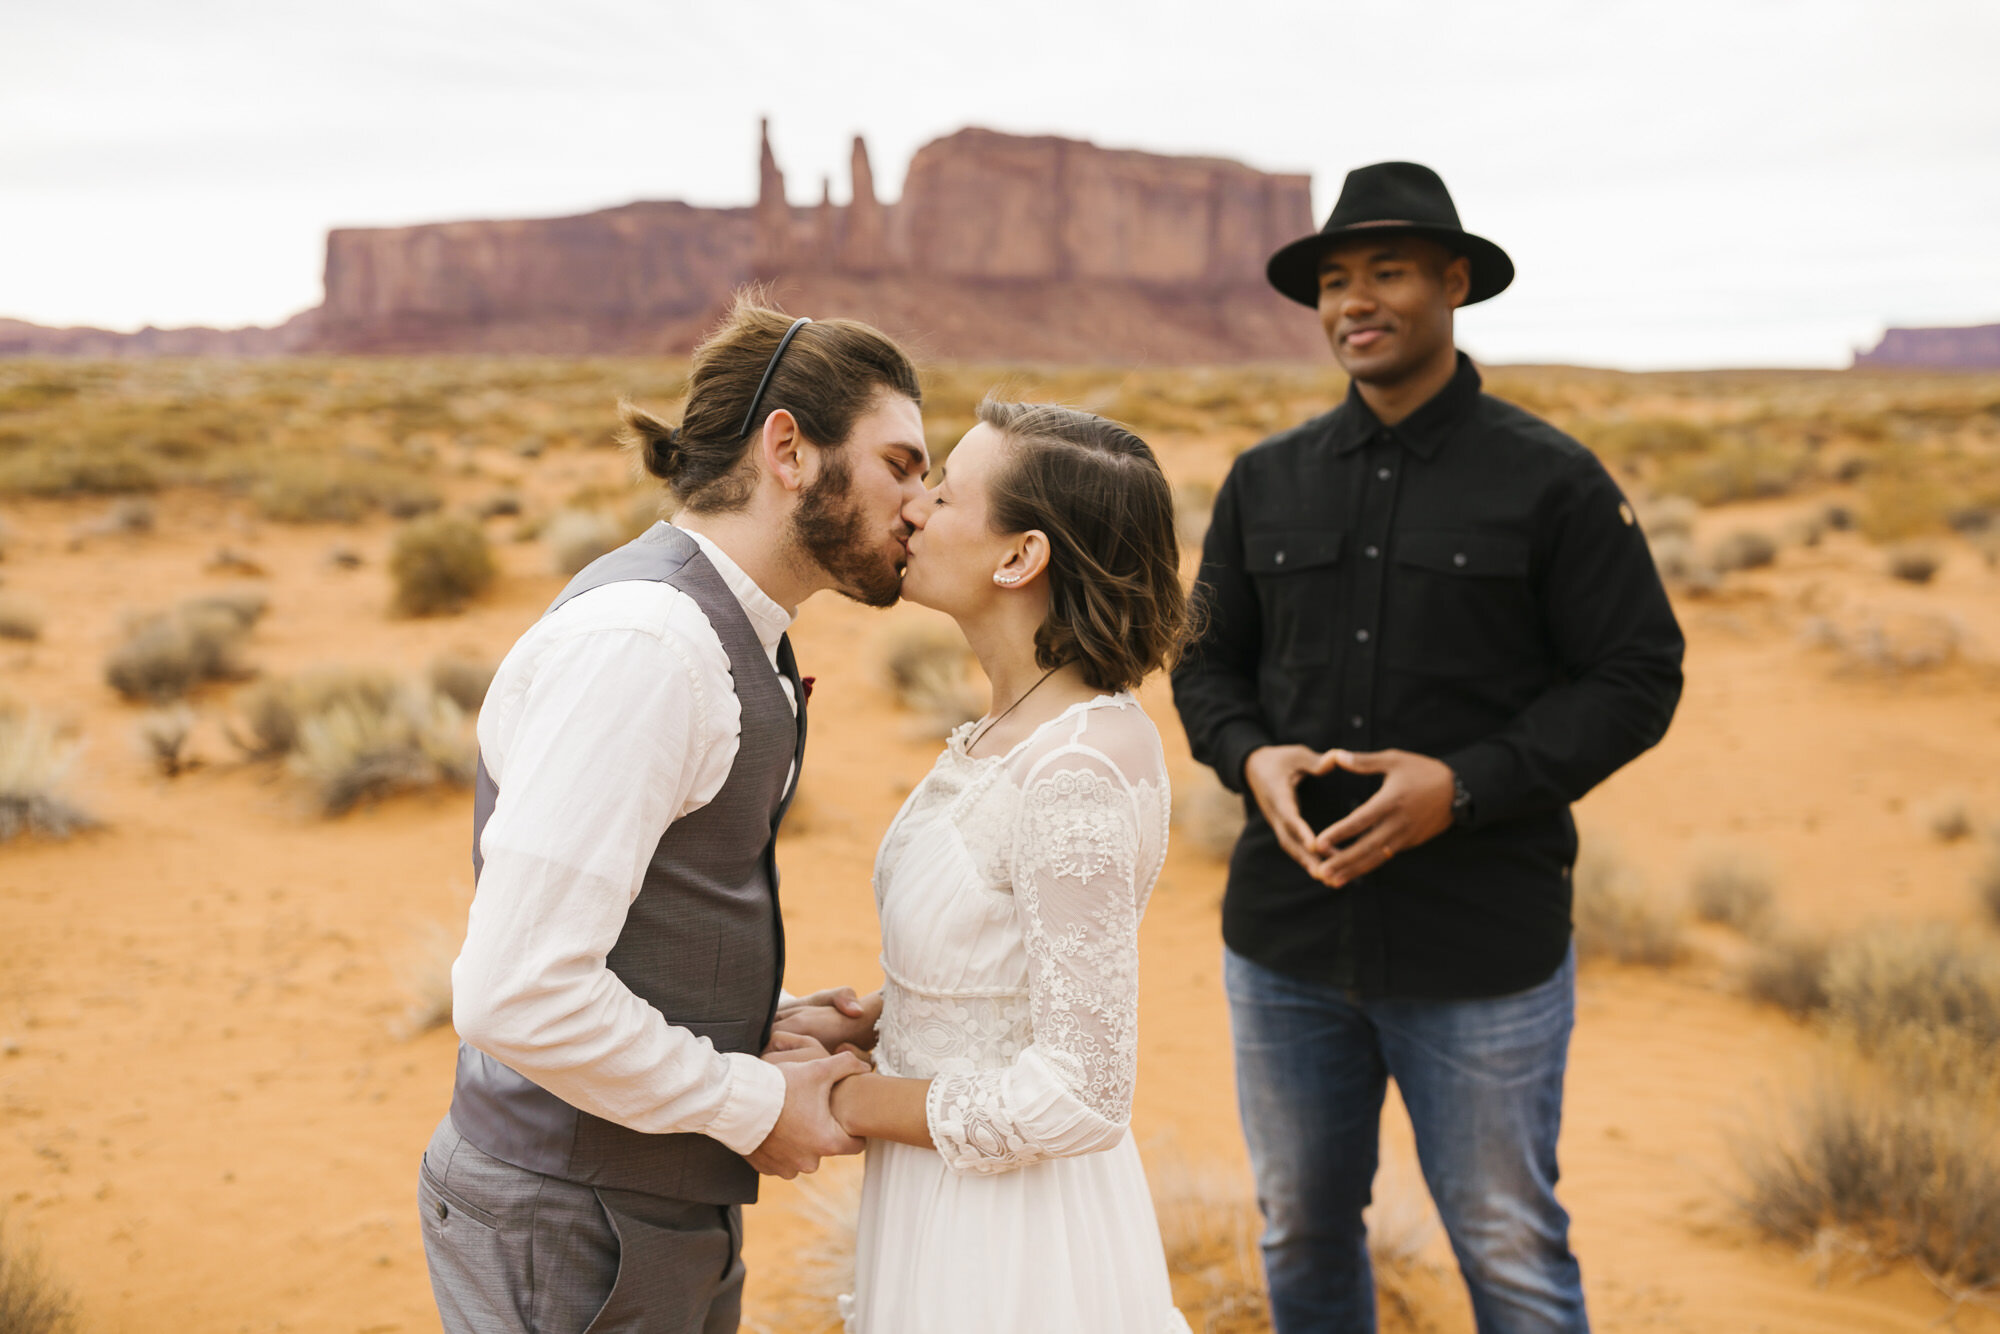 Just married couple share their first kiss after vow exchange at their Monument Valley wedding